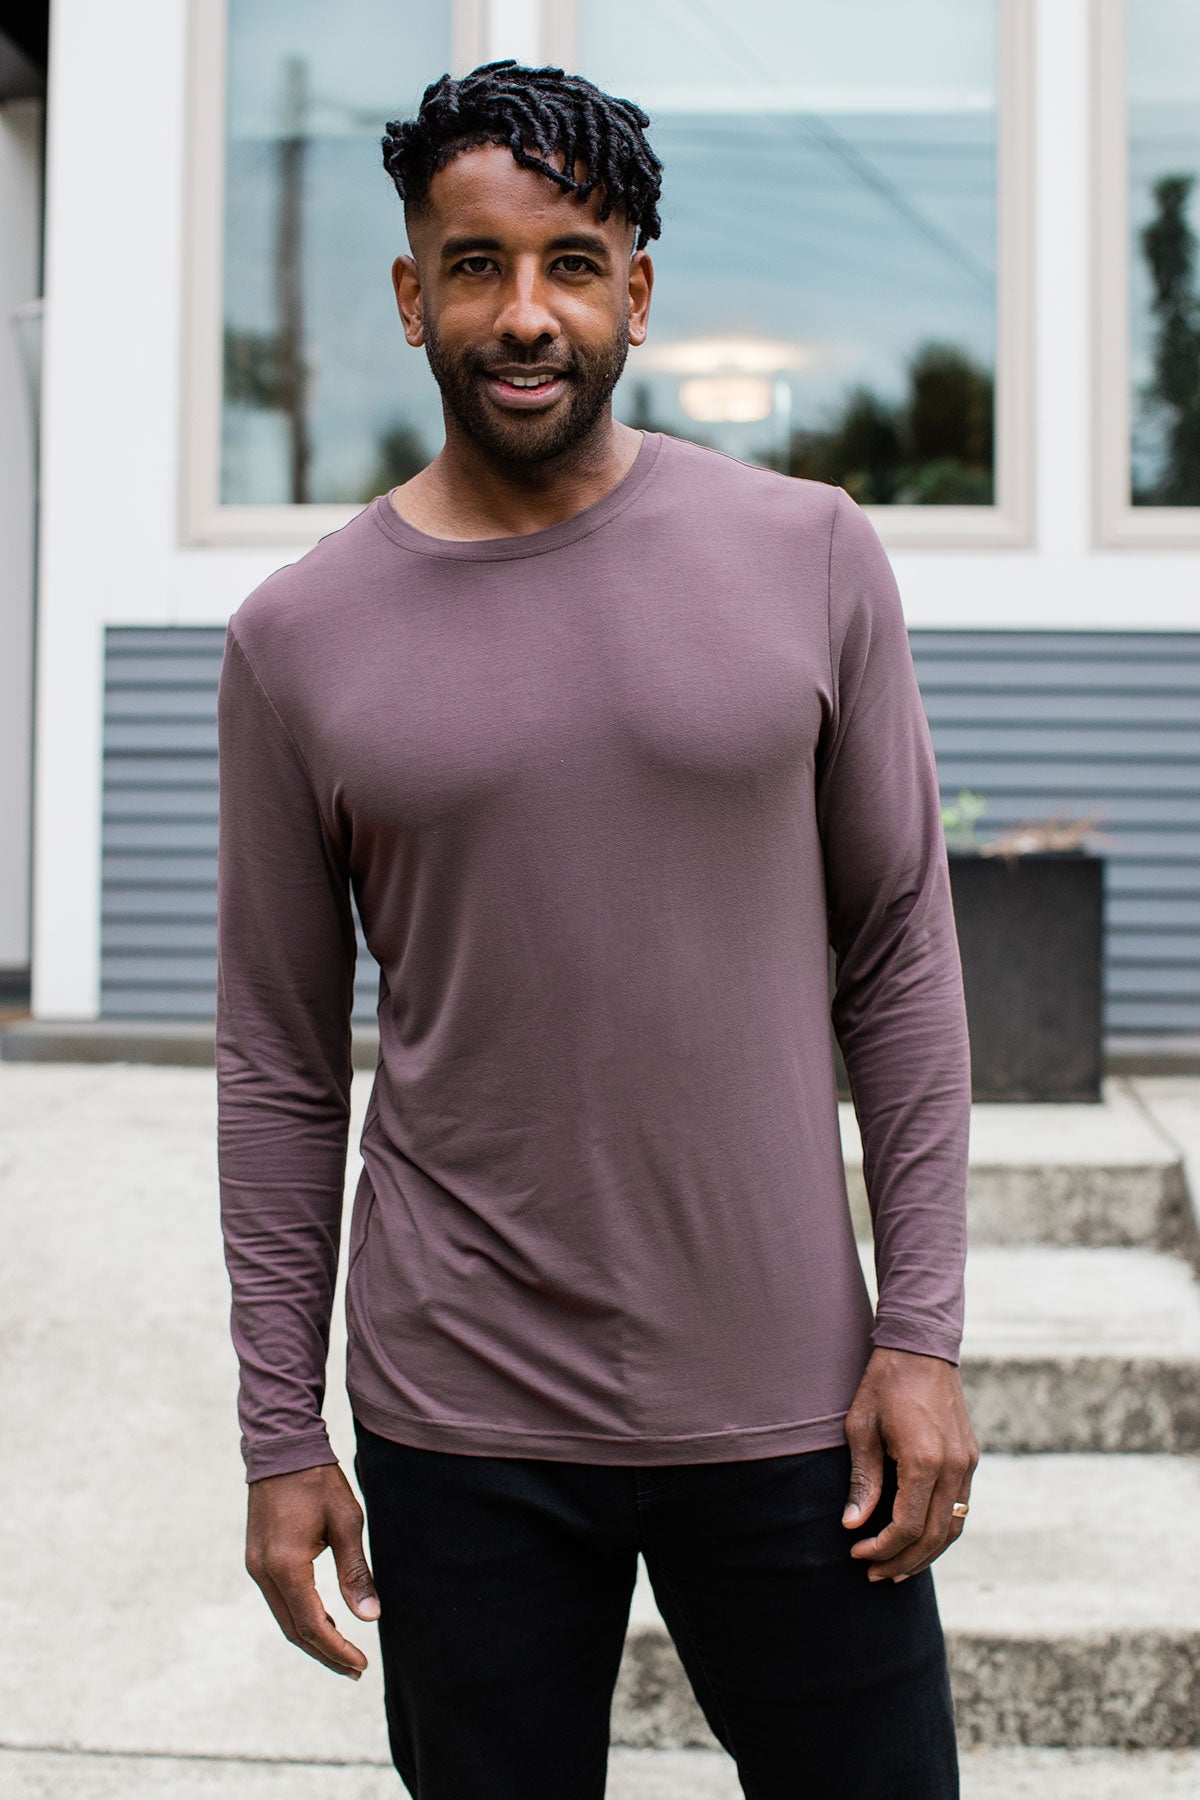 A man standing and smiling with both hands at his sides, wearing Yala Jonah Men's Long Sleeve Bamboo Crew Tee Shirt in Mink